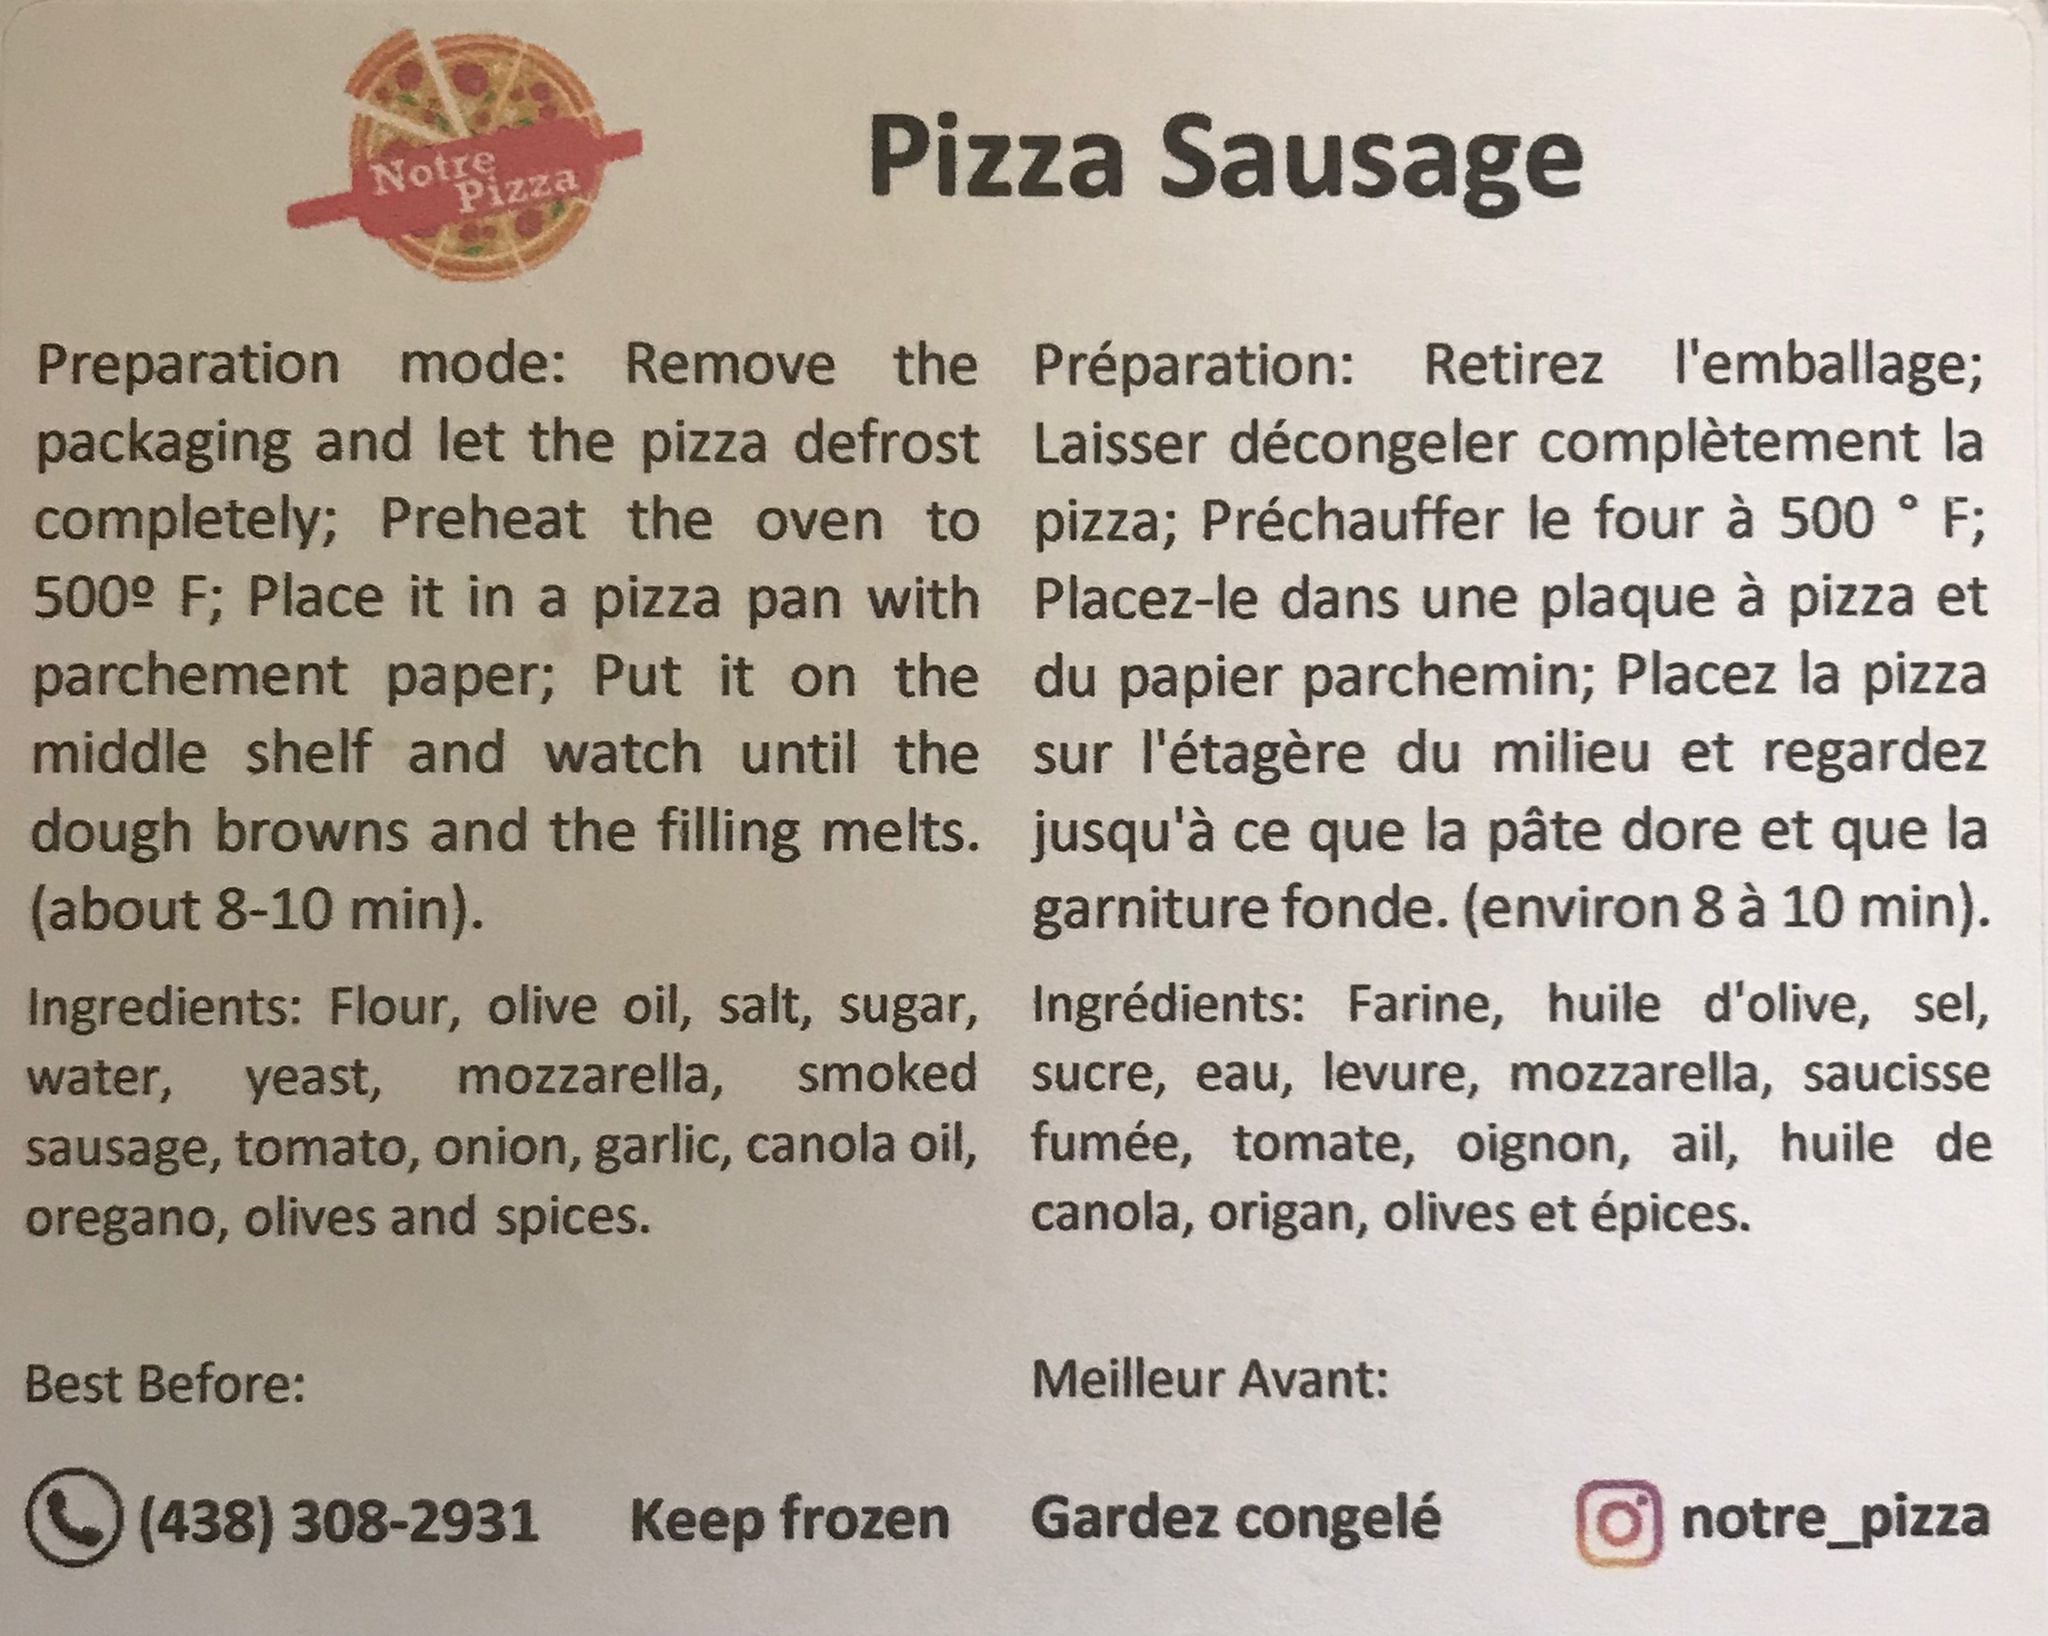 NOTRE PIZZA - Home-made Pizza - Sausage - FINAL SALE - EXPIRED or CLOSED TO EXPIRY